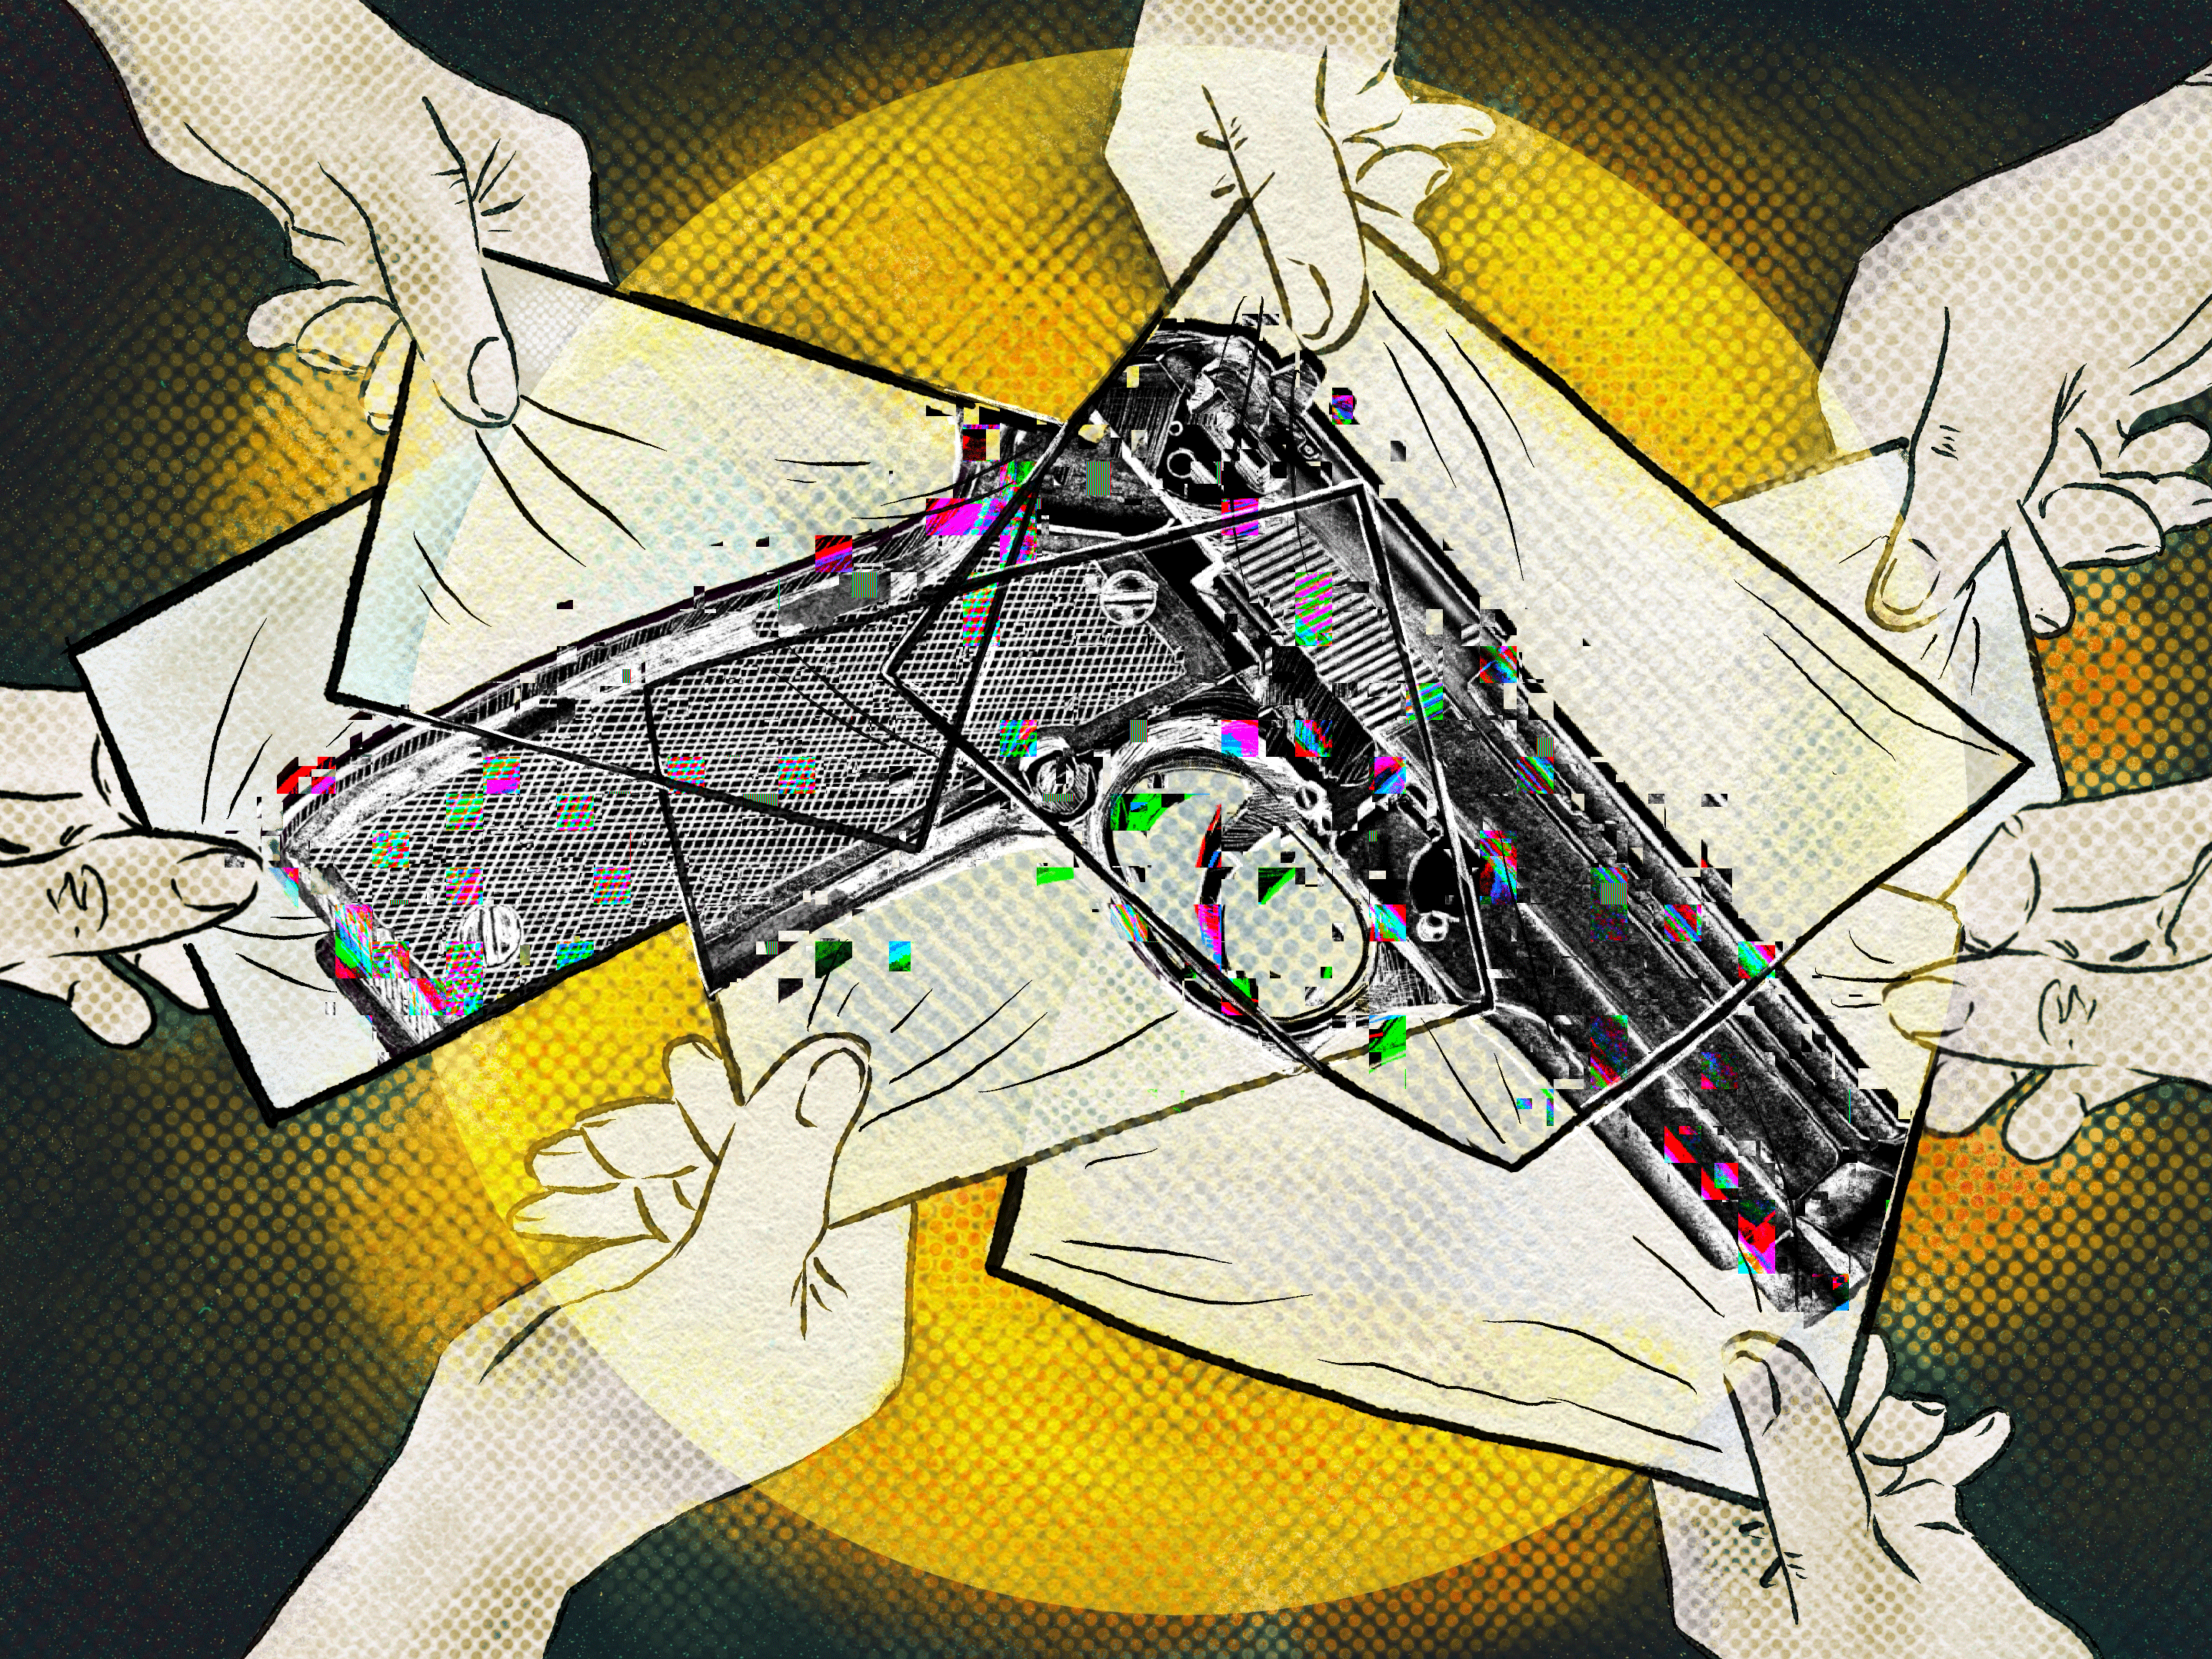 Meet the public health researchers trying to rein in America’s gun violence crisis